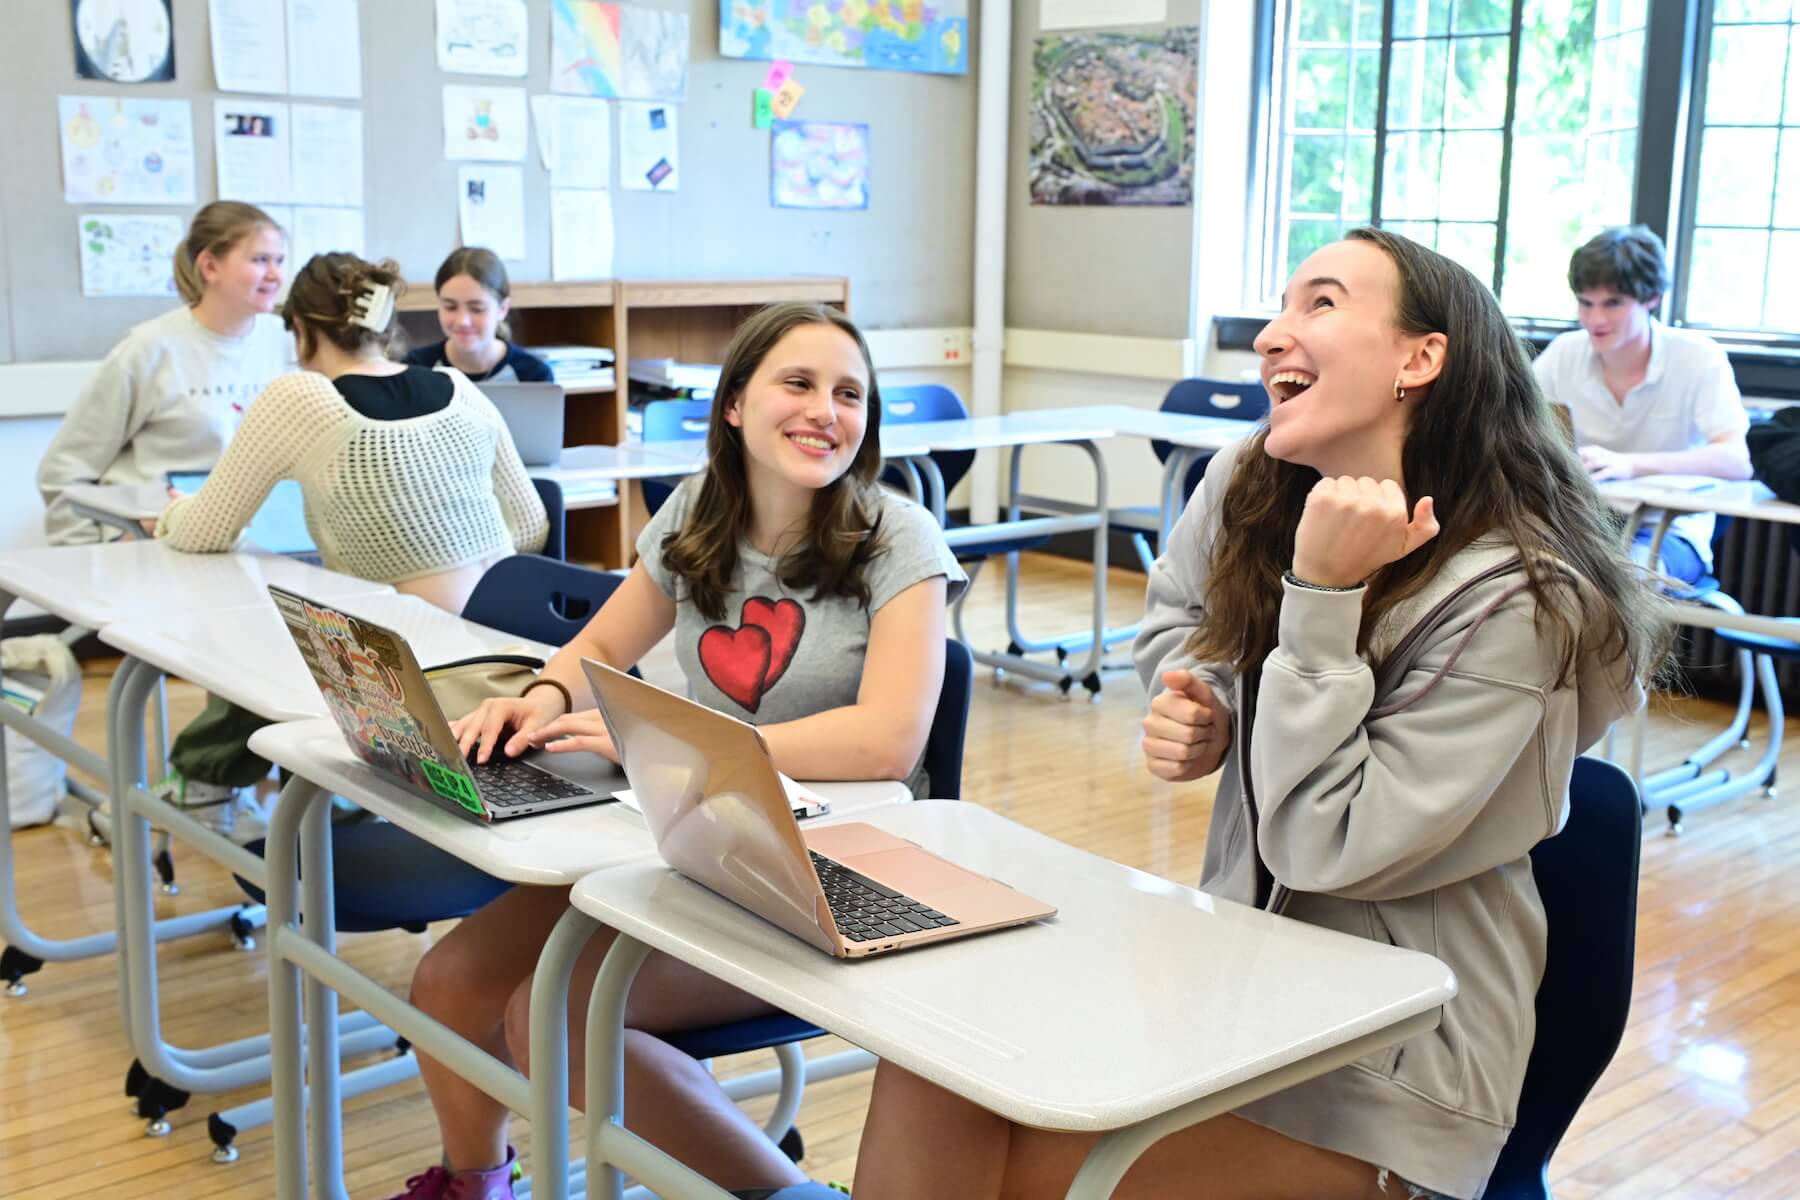 Ethical Culture Fieldston School Upper School students laughing together in class